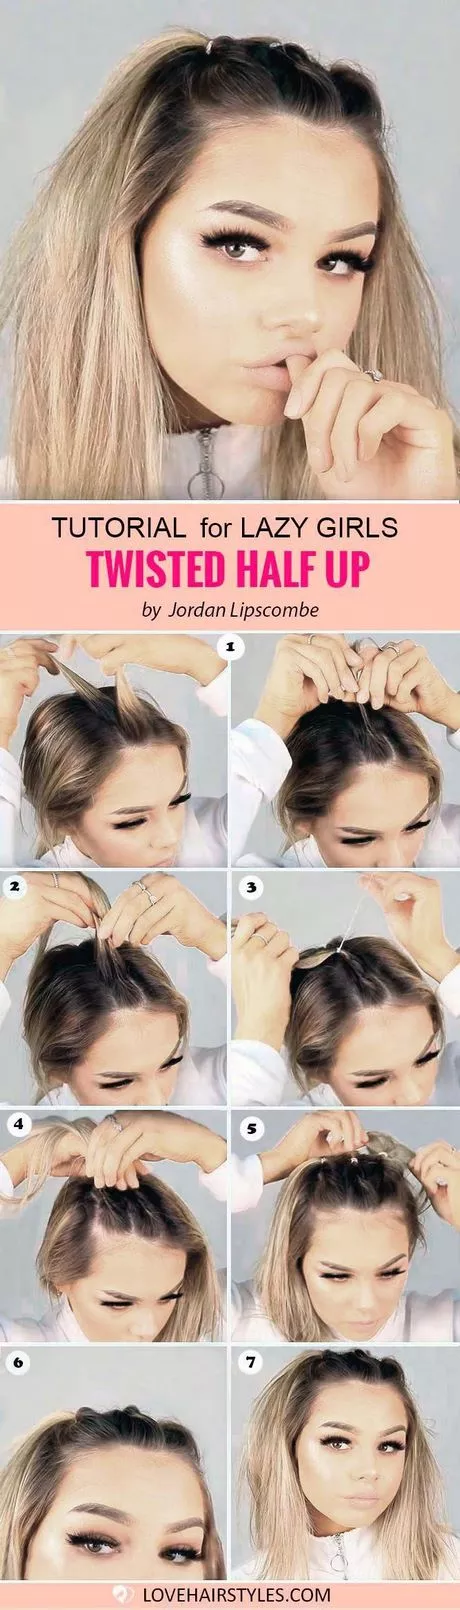 Quick and easy hairstyles for girls quick-and-easy-hairstyles-for-girls-50_4-11-11